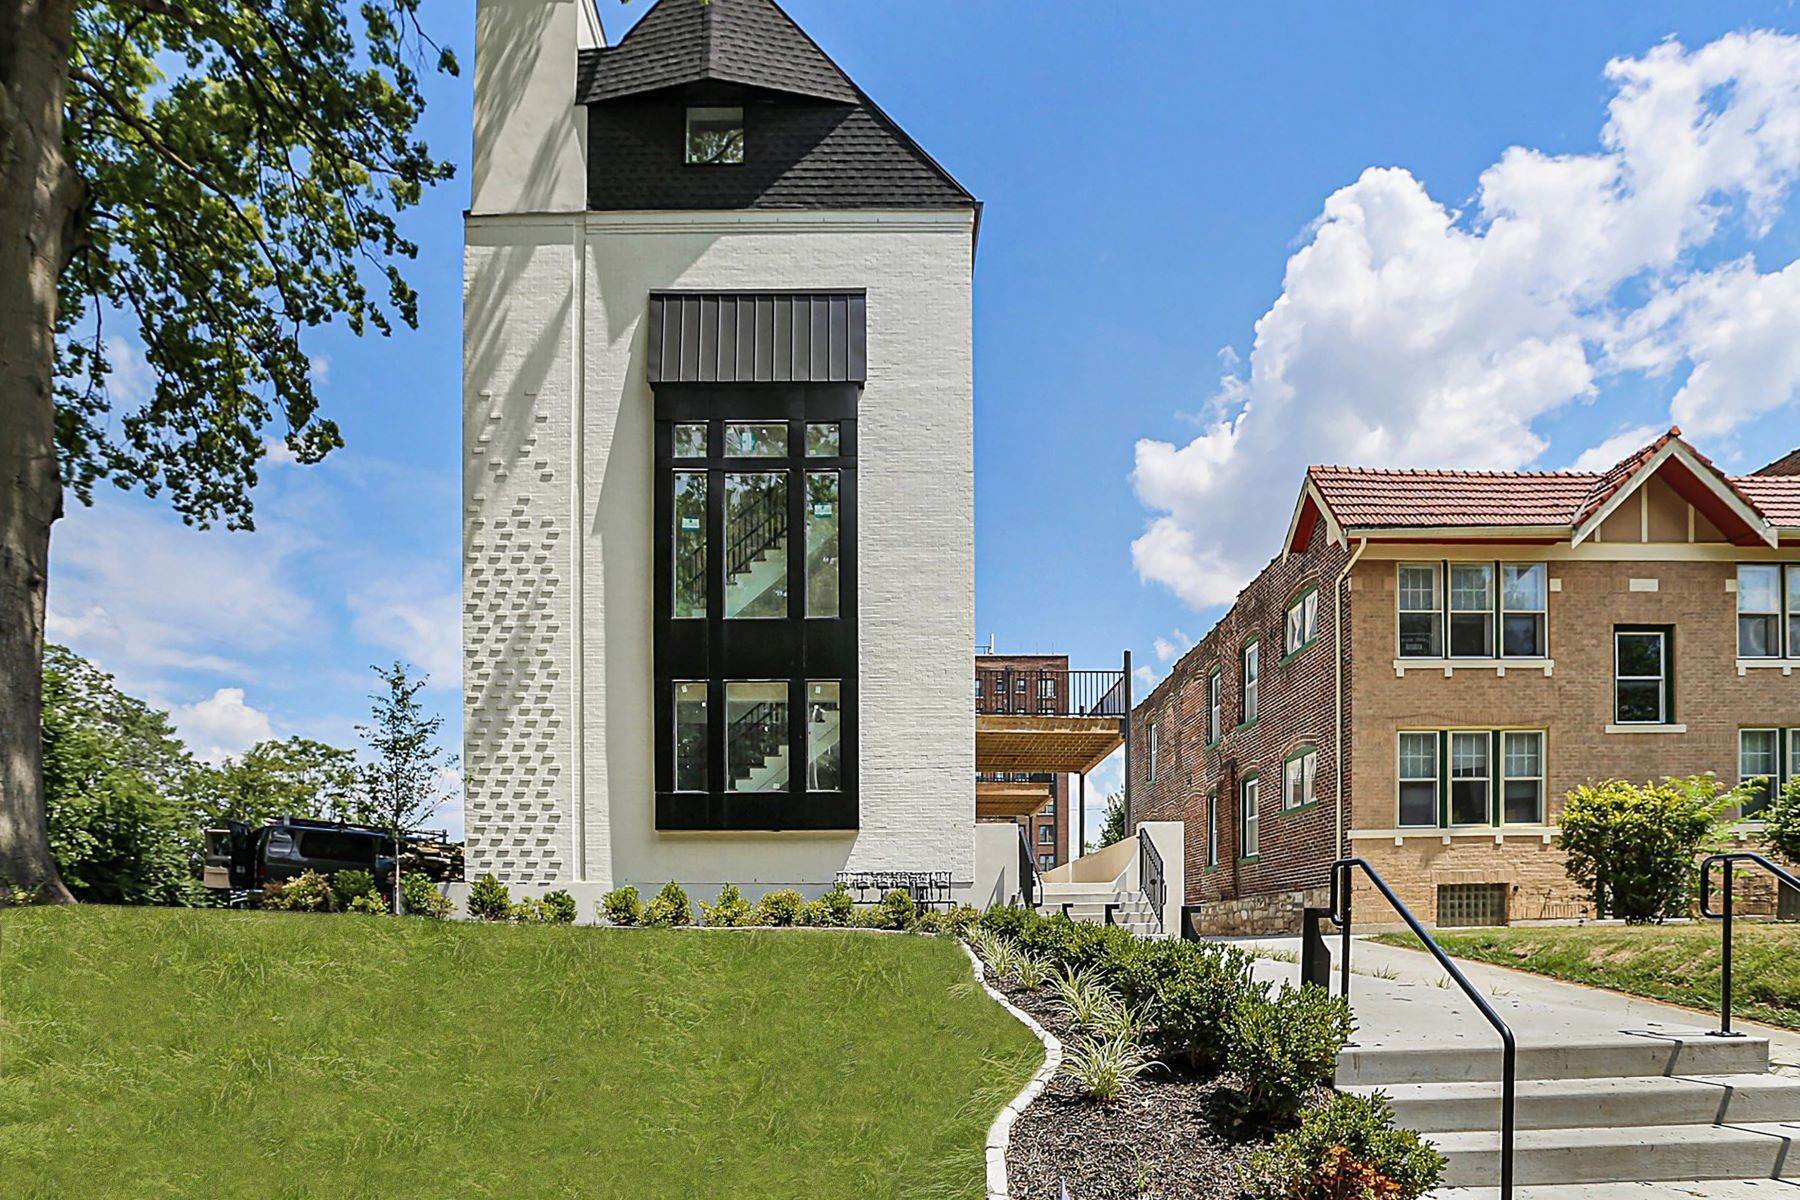 Property for Sale at West Village Townhomes - 102 4201 West Pine Boulevard #102 St. Louis, Missouri 63108 United States